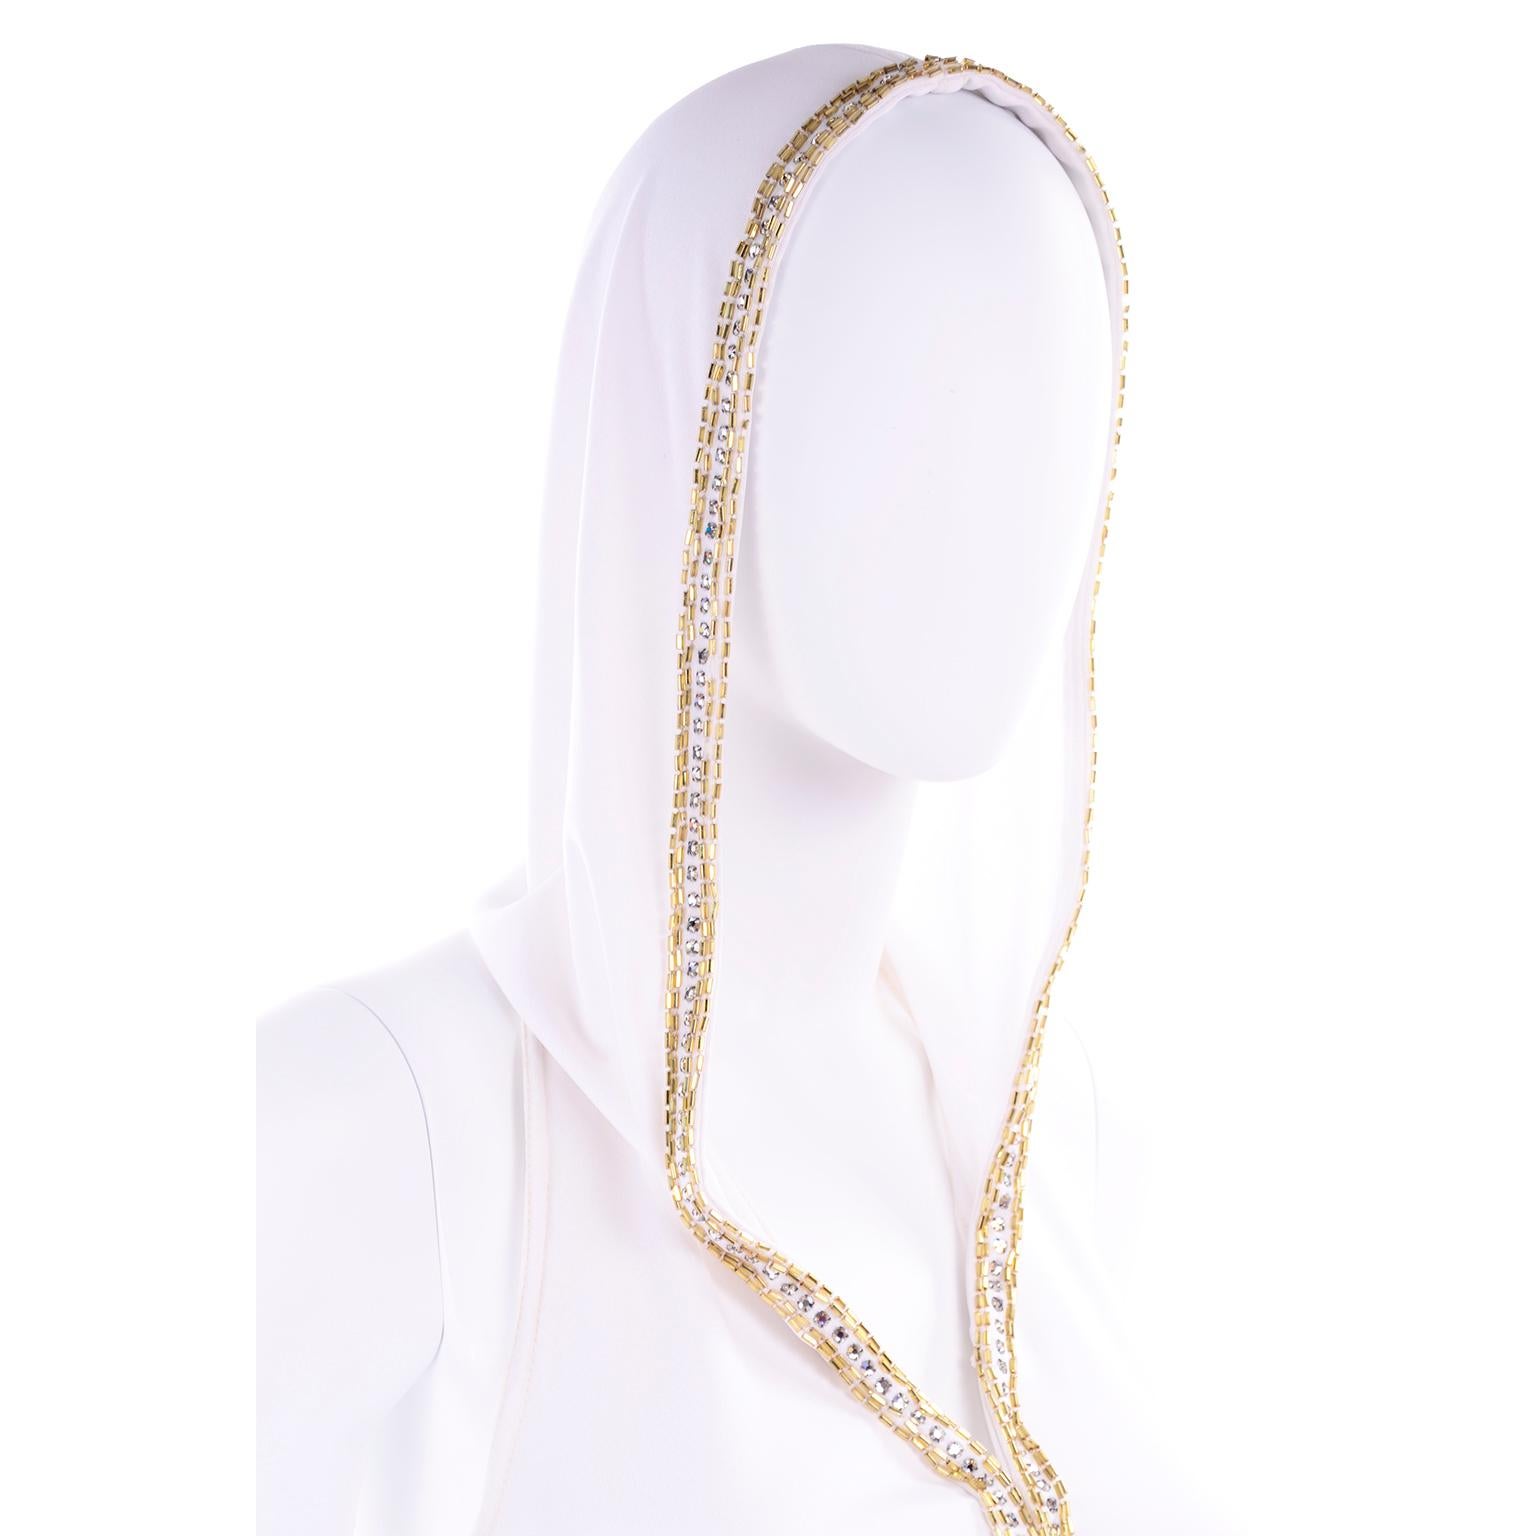 1970s Vintage White Hooded Jersey Maxi Dress With Gold Beads & Rhinestones 4